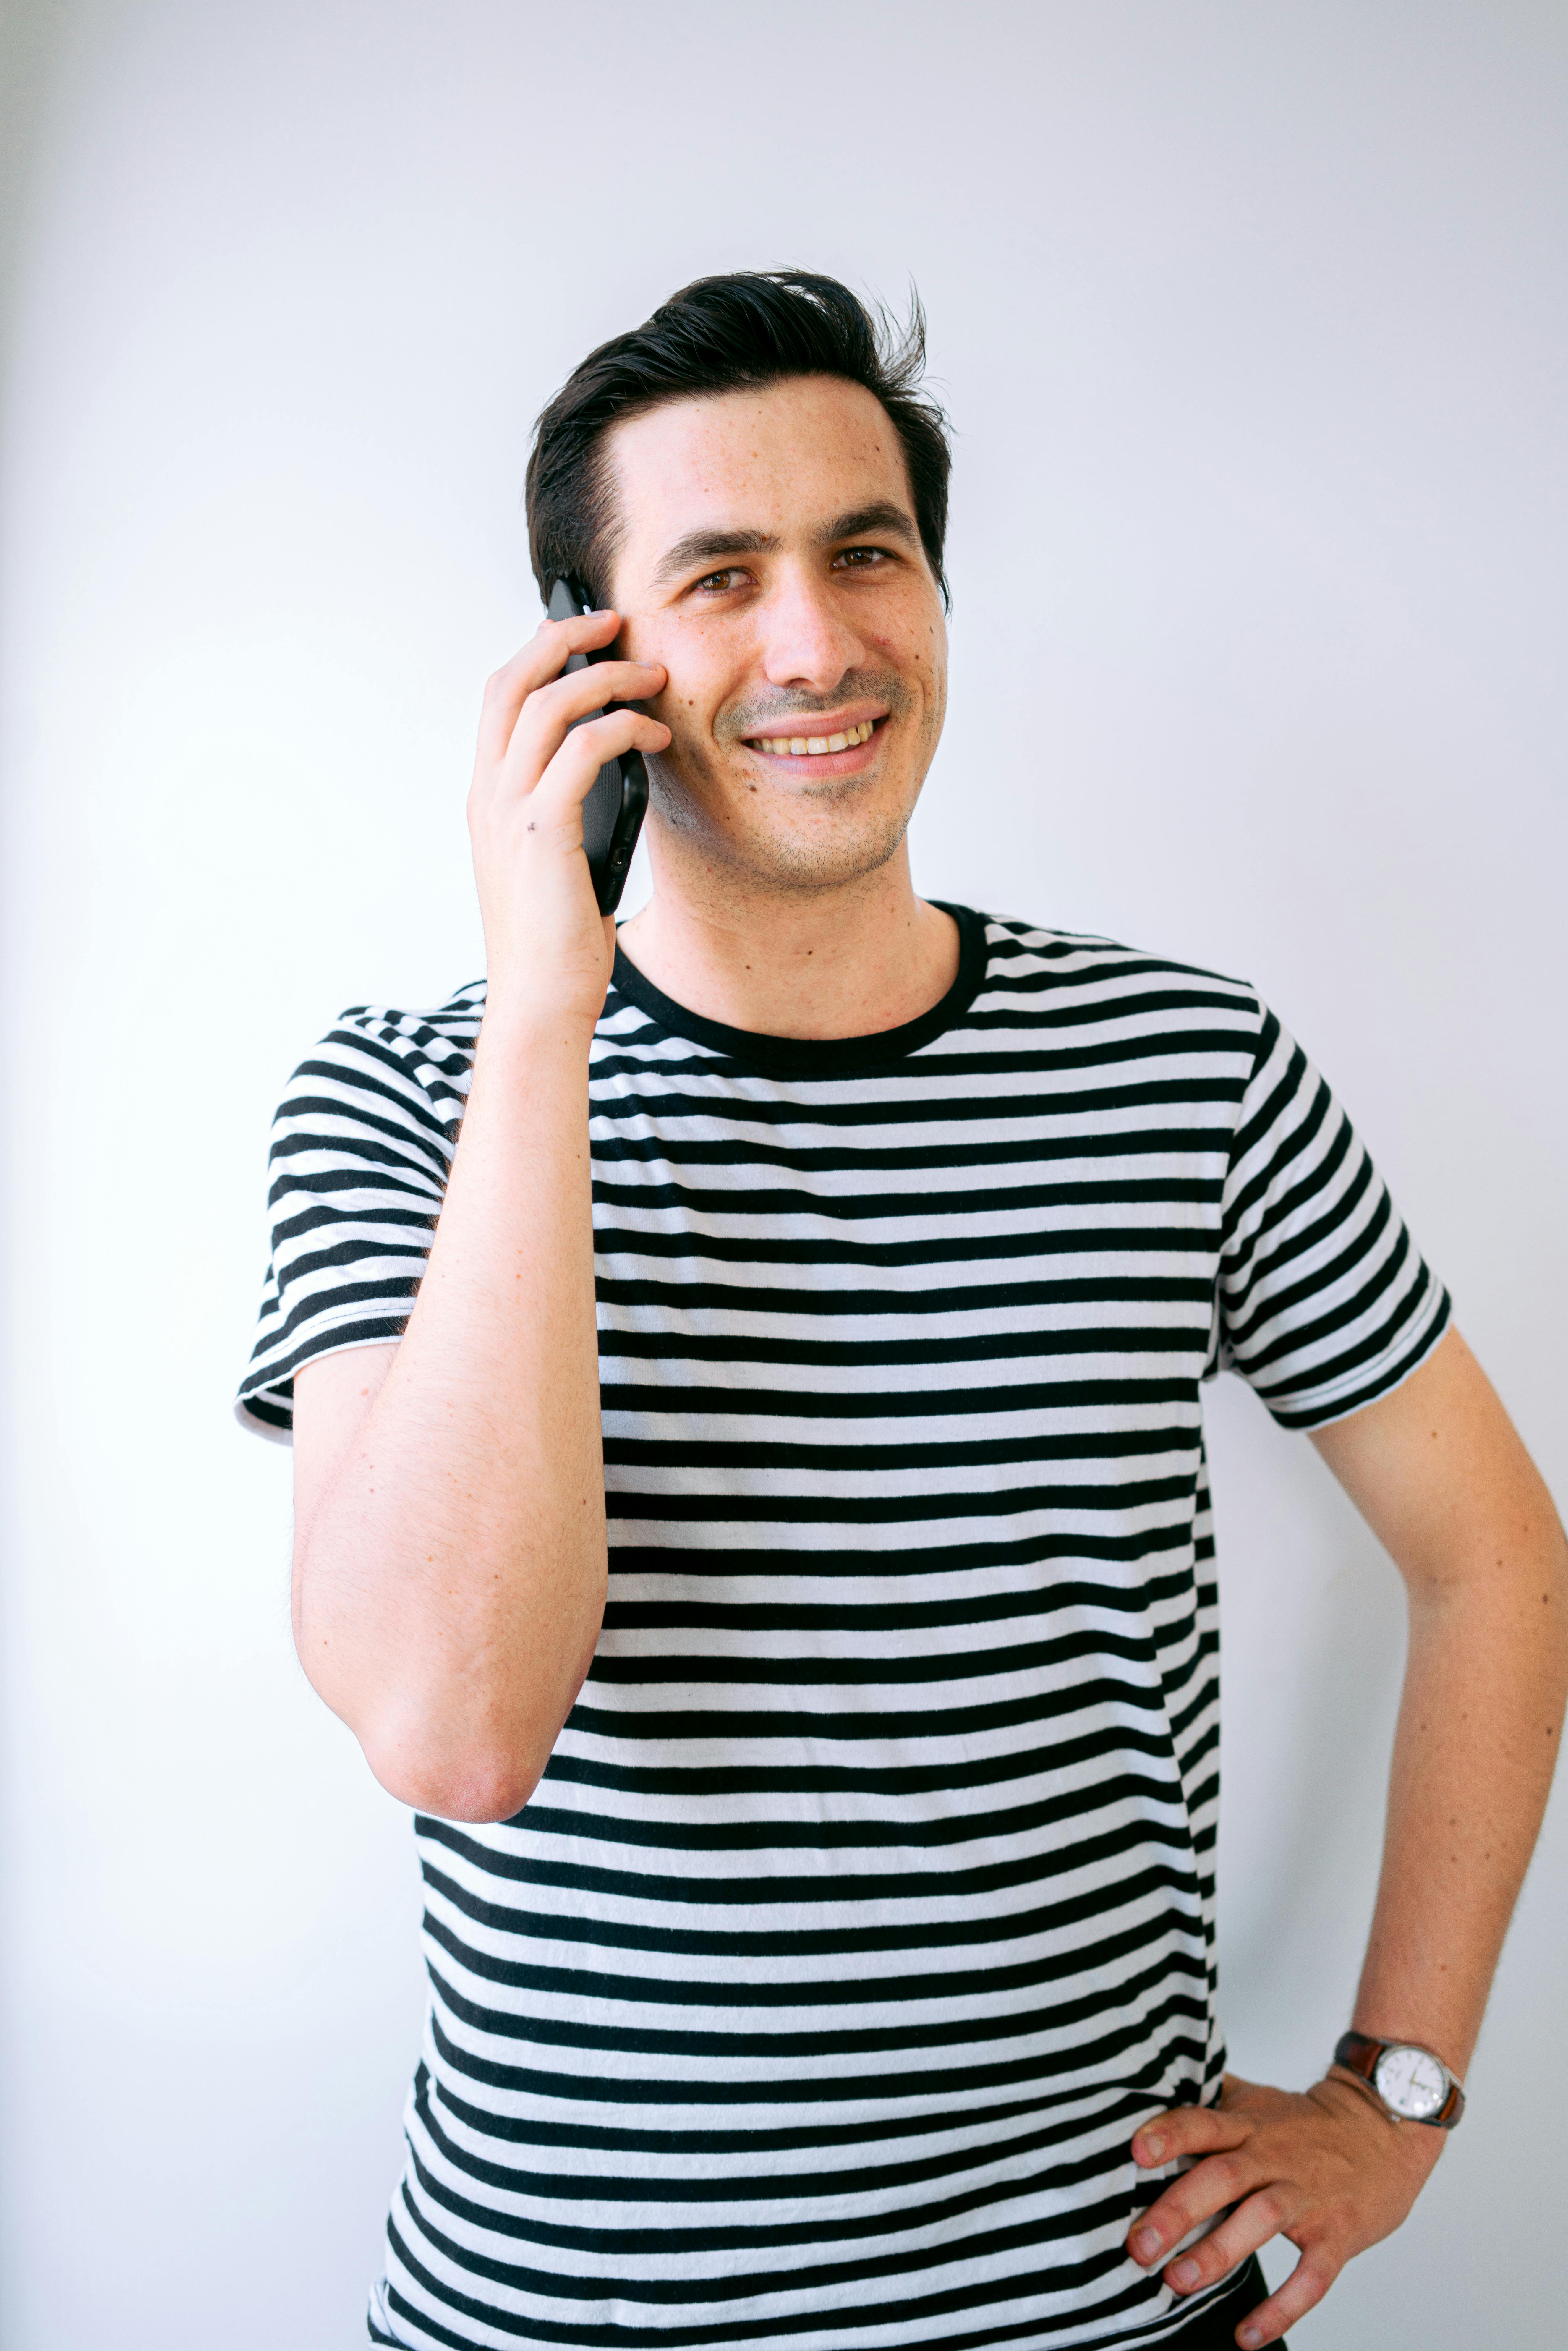 Laughing man talks on the phone | Source: Pexels